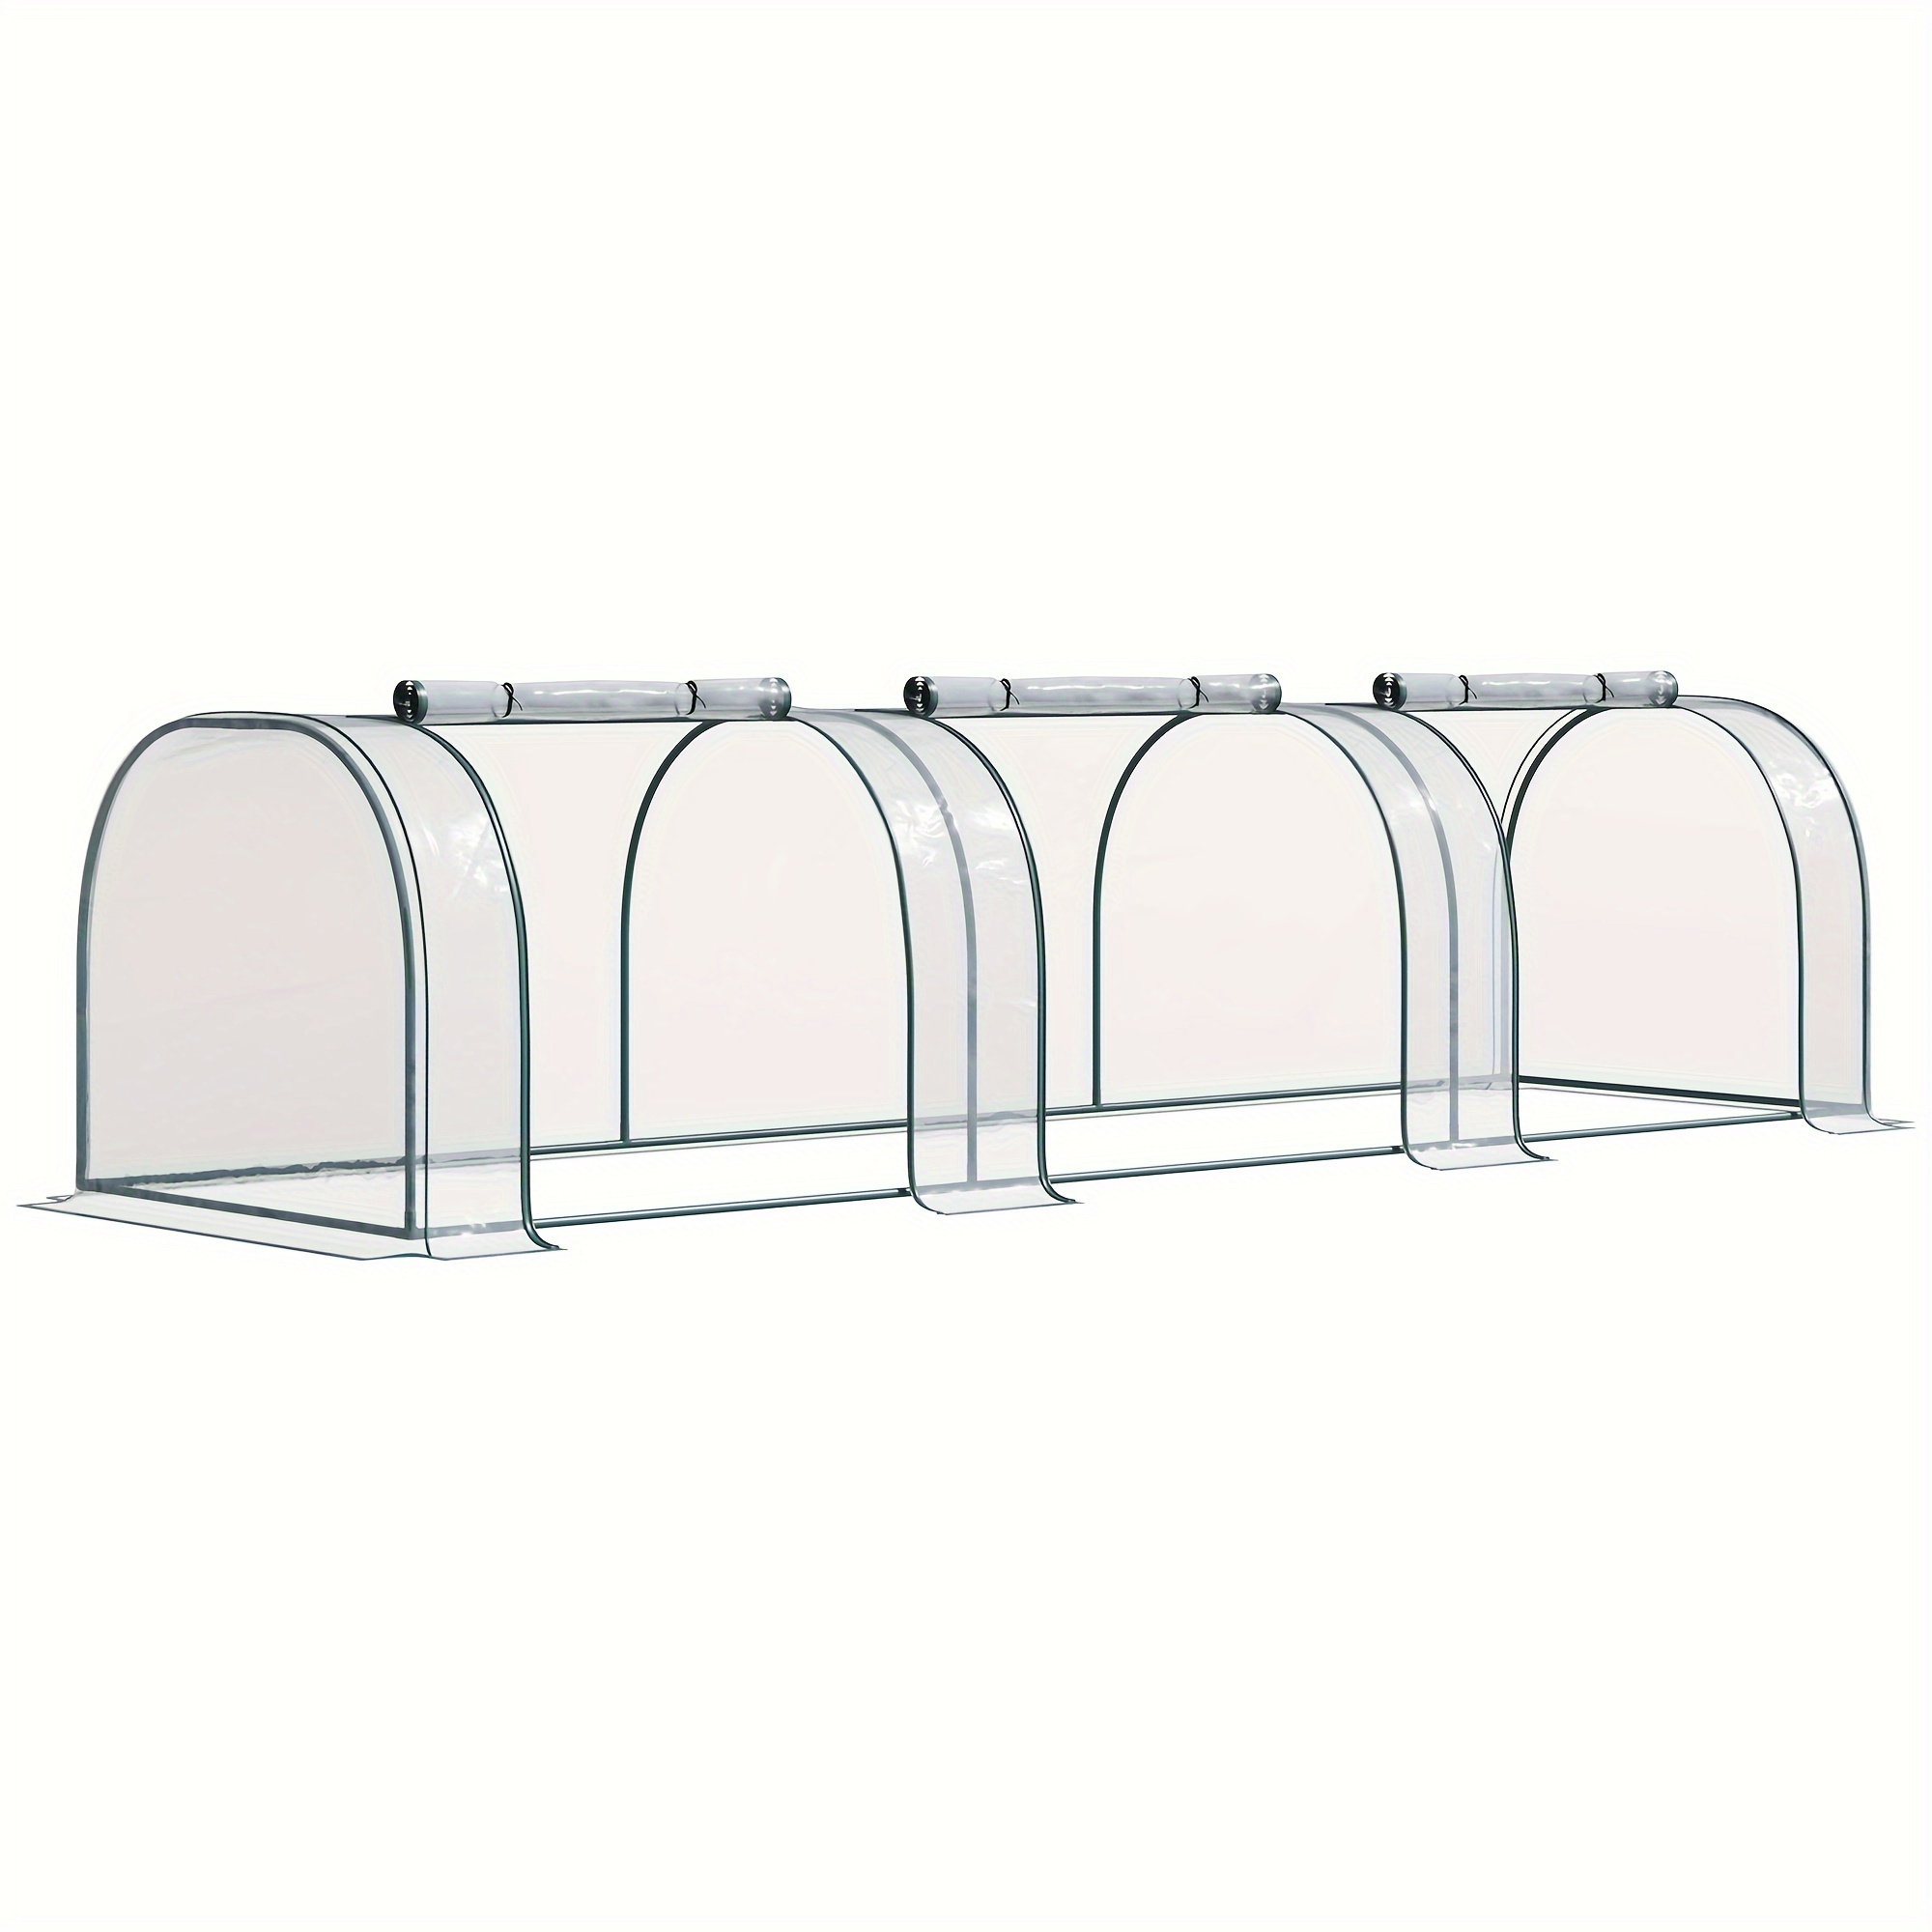 

11' X 3' X 2.5' Mini Greenhouse, Portable Tunnel Green House With Roll-up Zippered Doors, Uv Waterproof Cover, Steel Frame, Clear